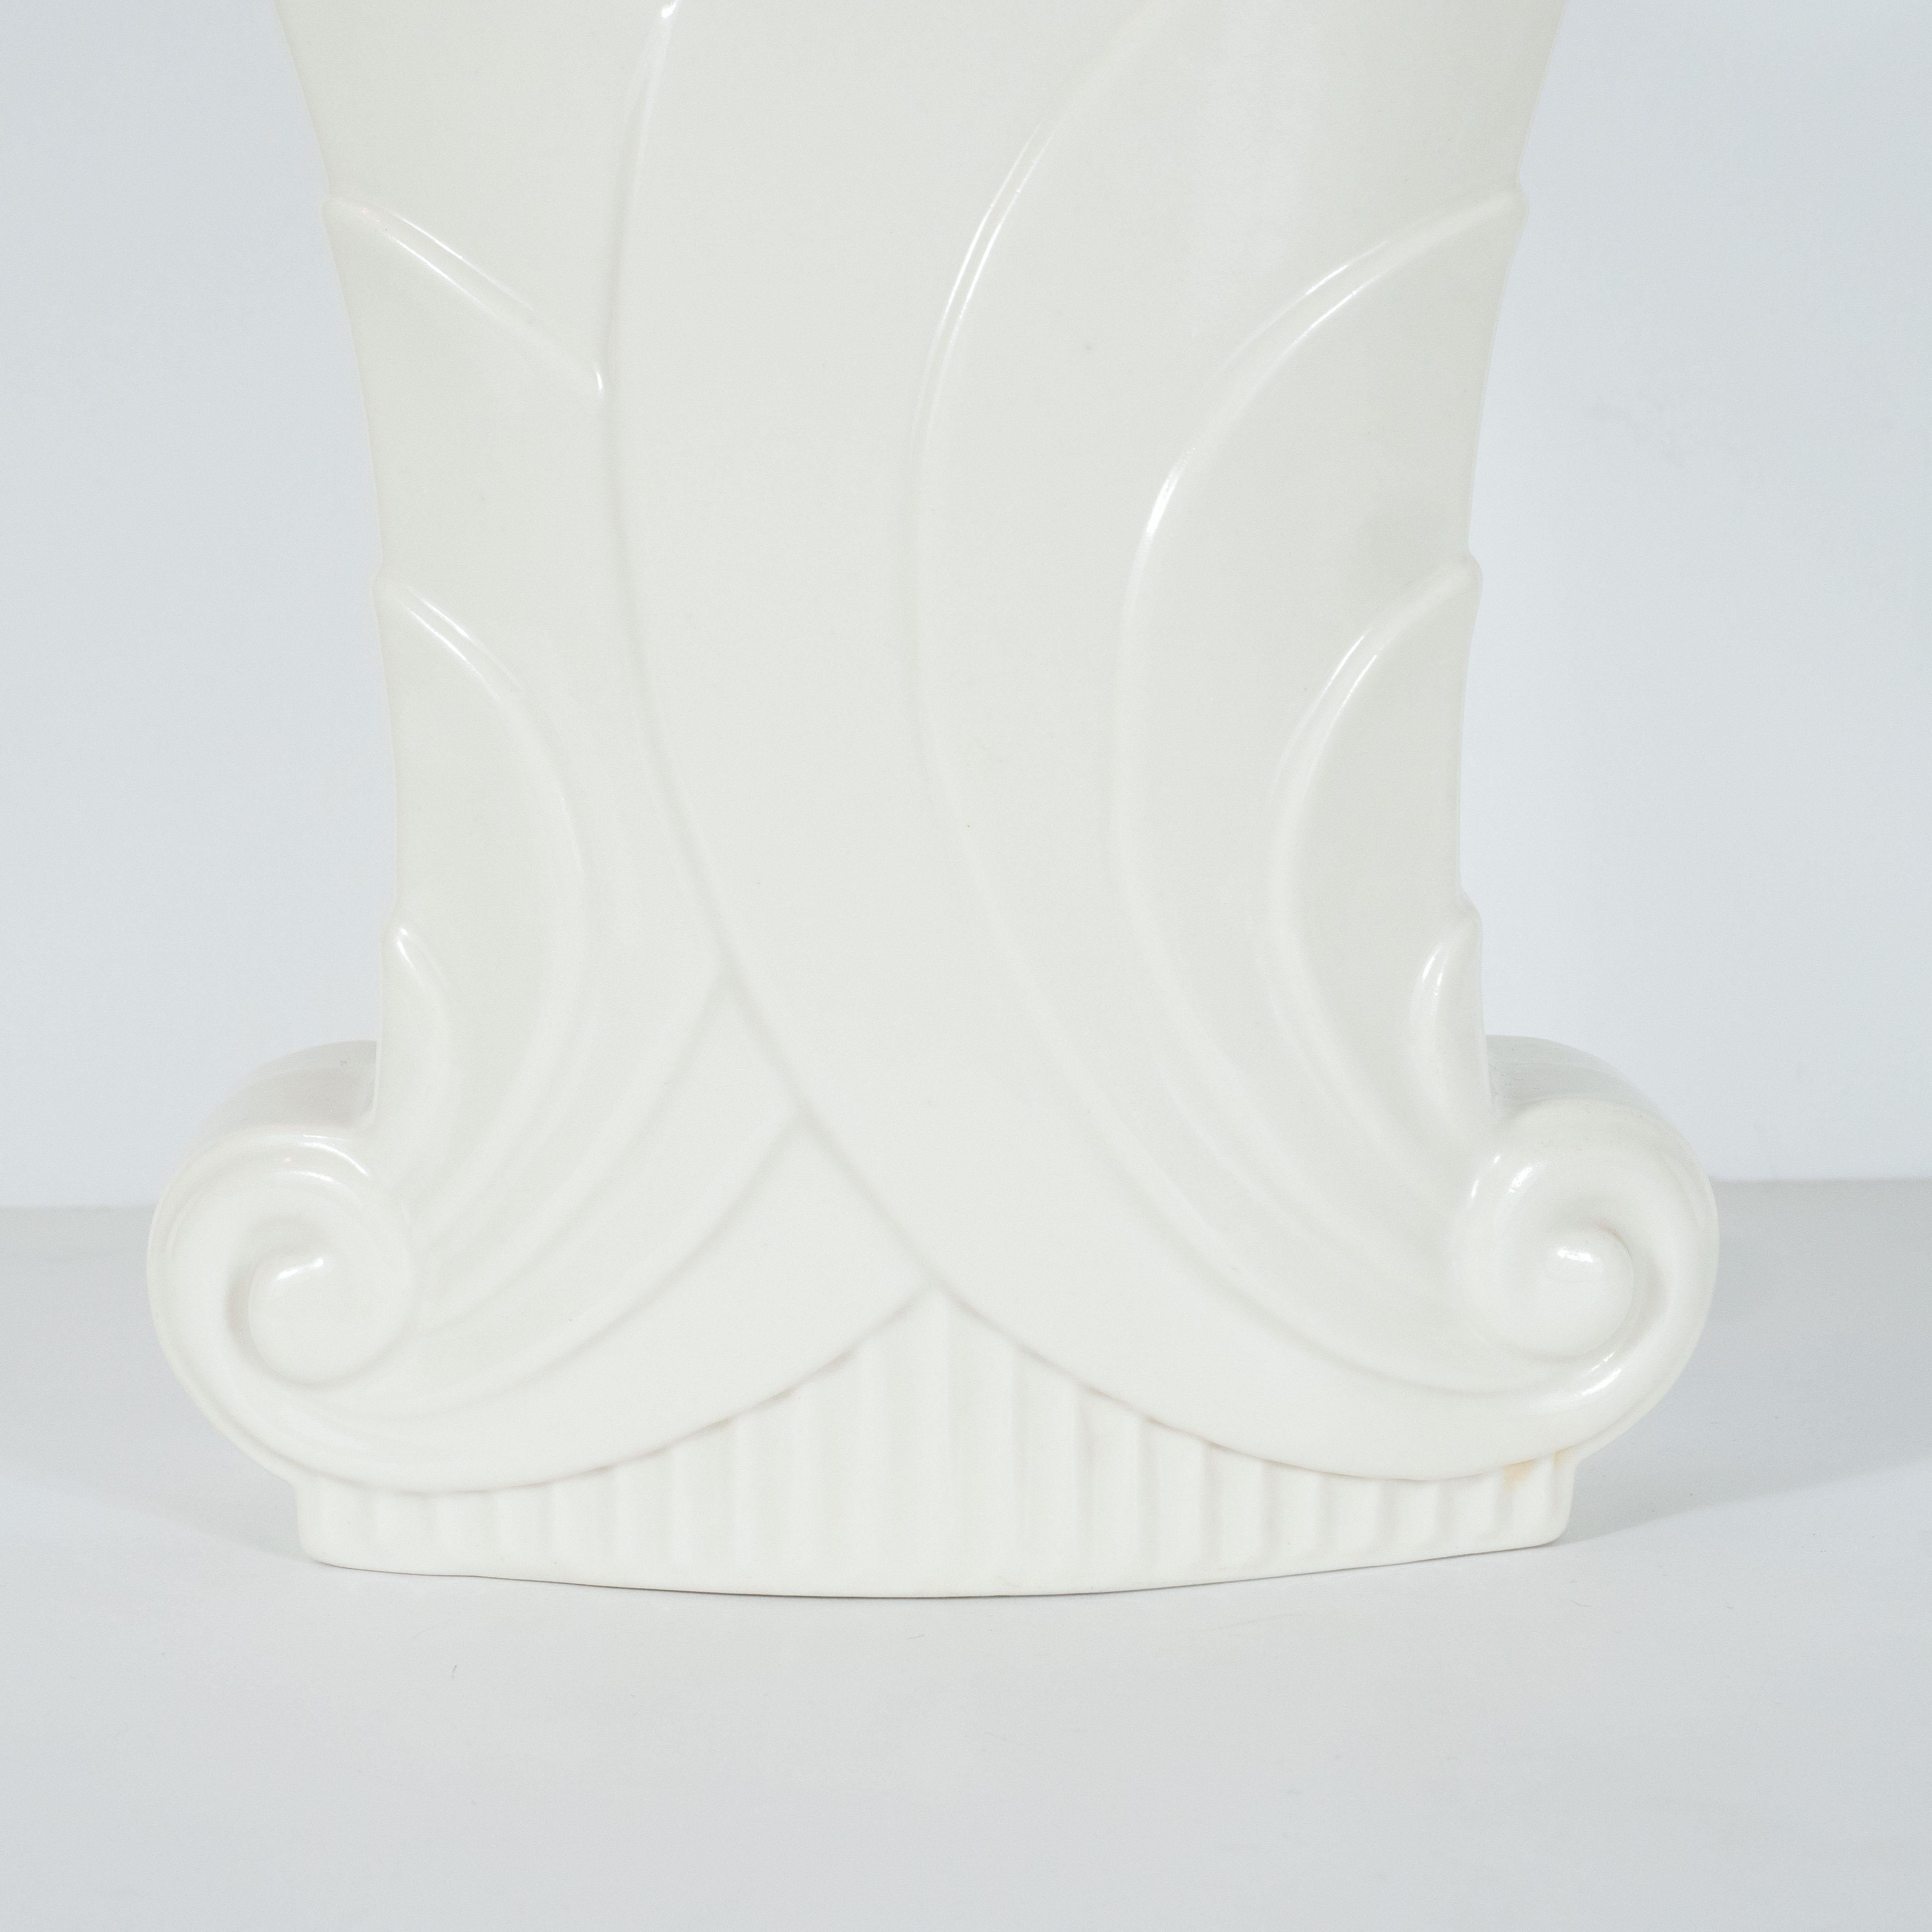 This refined Art Deco vase was realized in the United States by the esteemed maker Abingdon Co., circa 1940. It features a reeded base, and a stepped rectangular body overlapping tiered stylized scroll forms culminating in a v-form mouth. With its